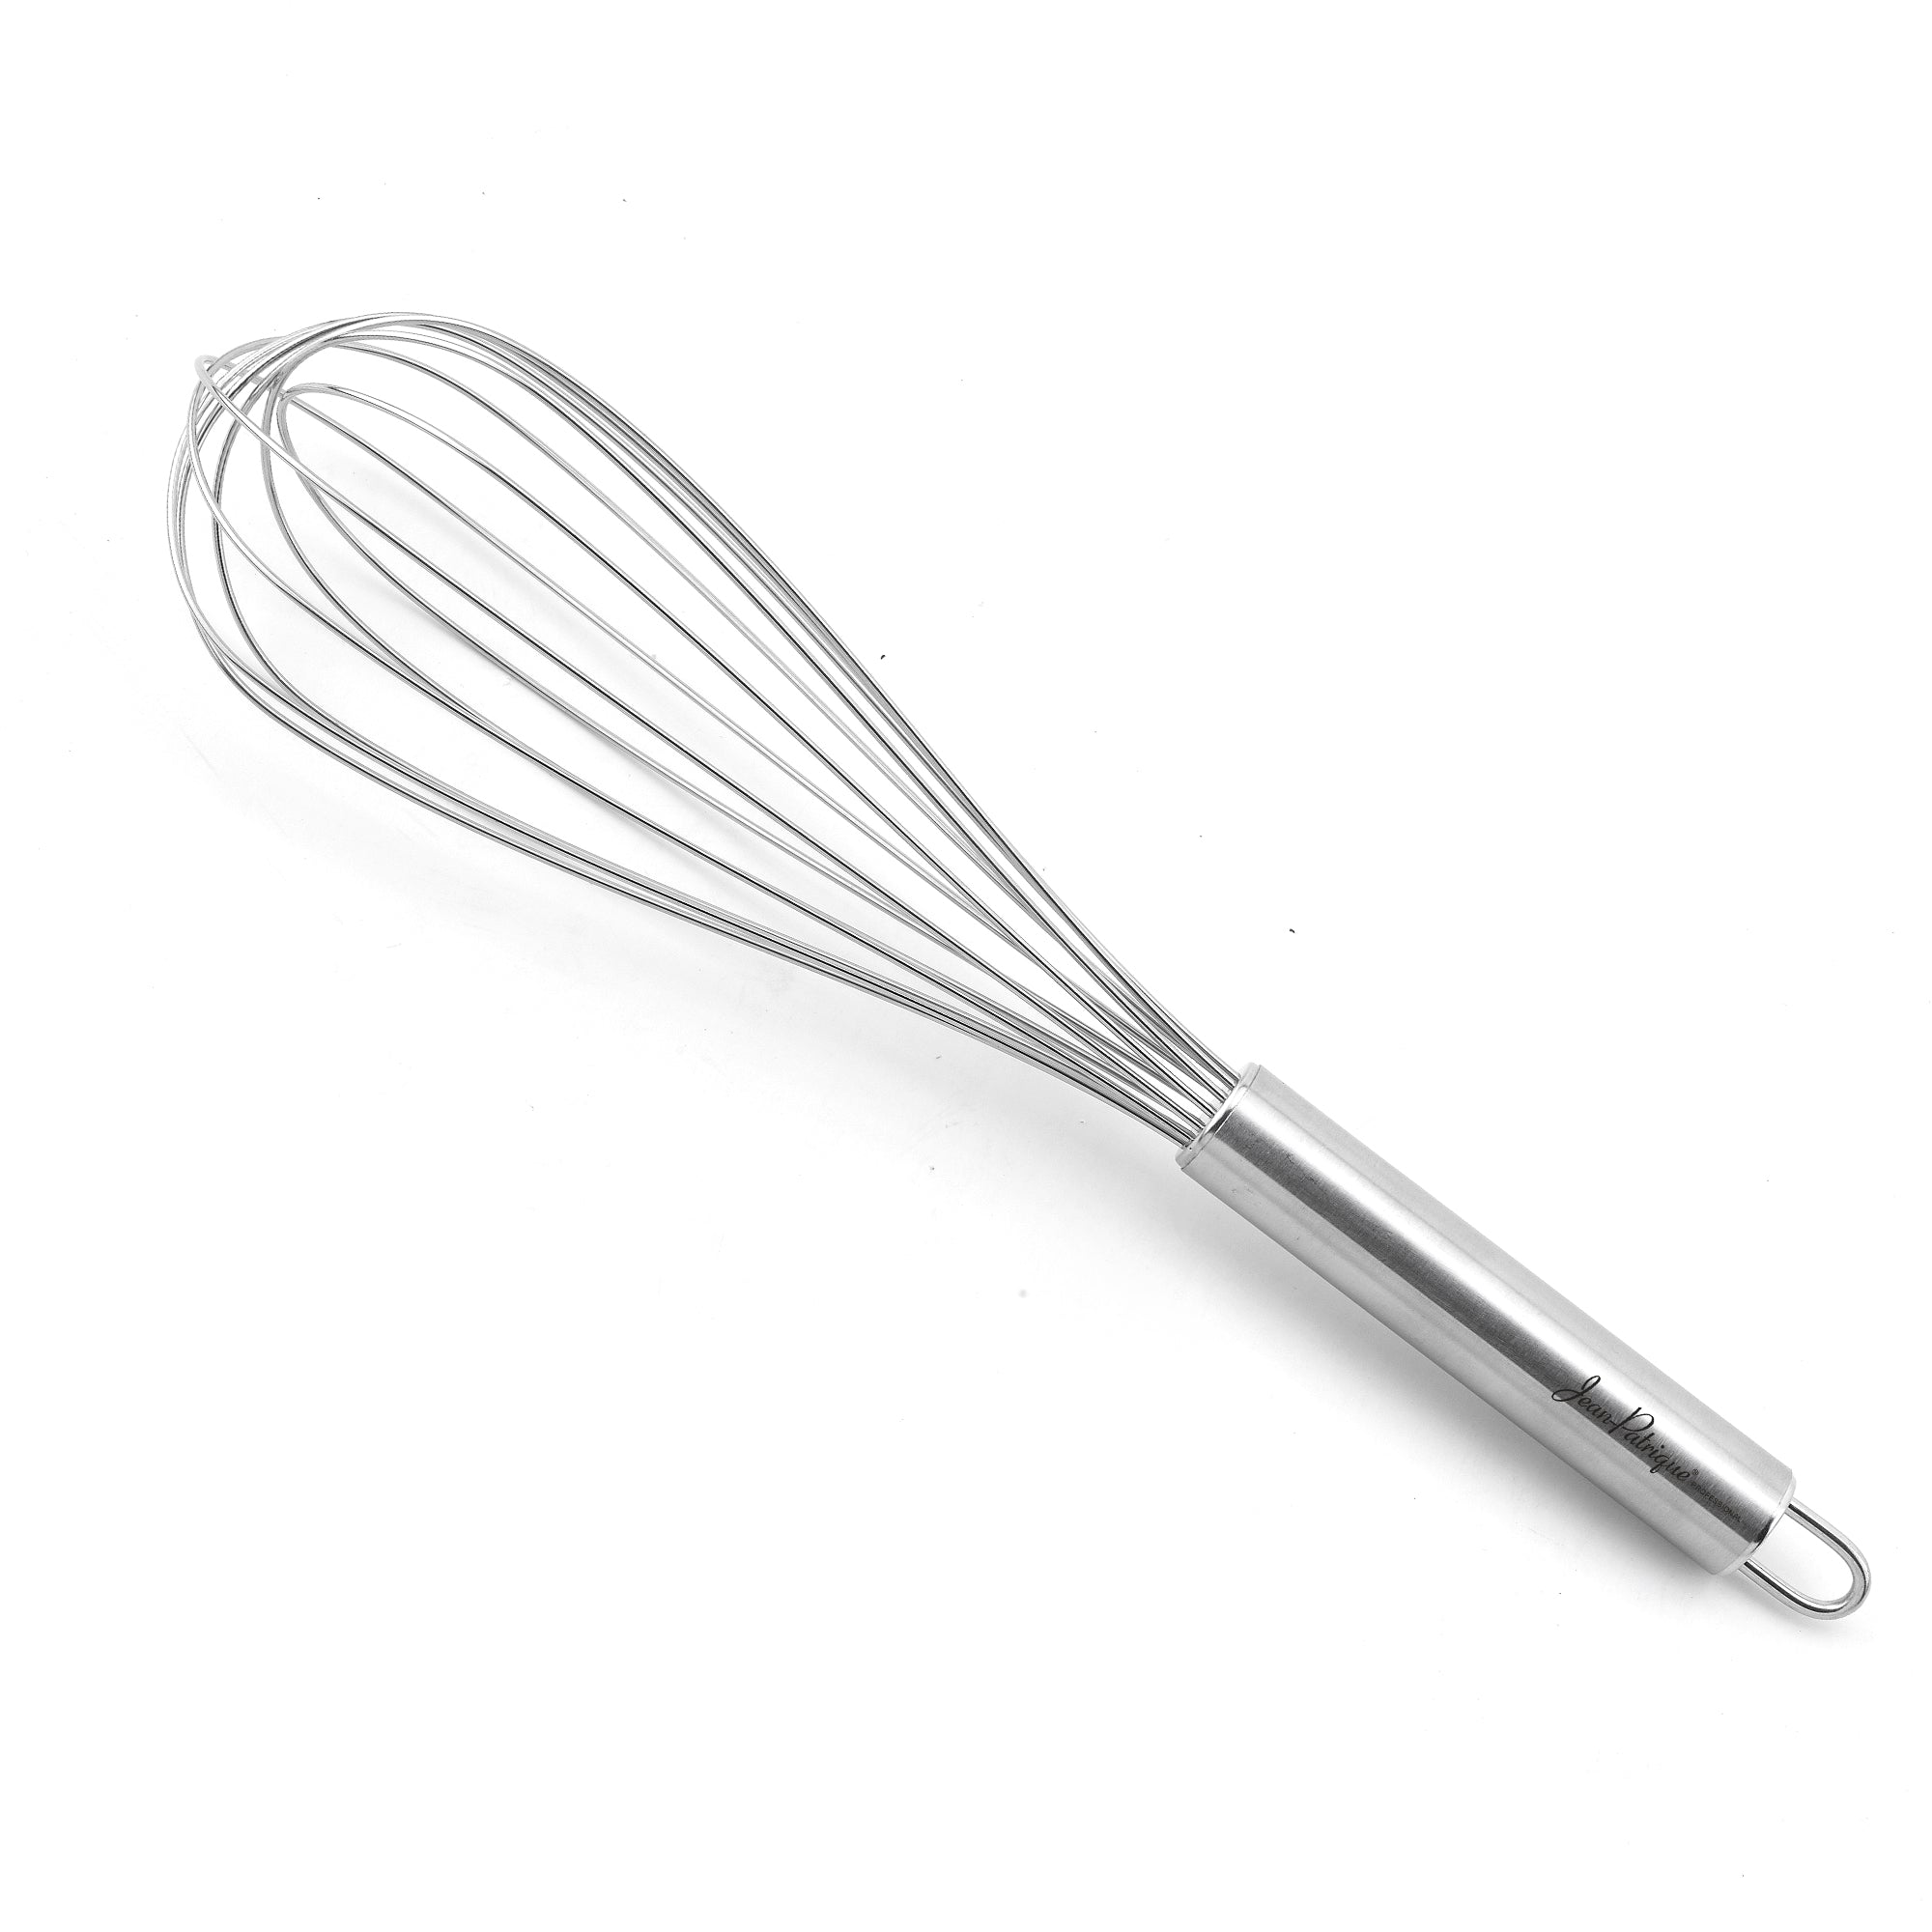 Stainless Steel Whisk – Jean Patrique Professional Cookware